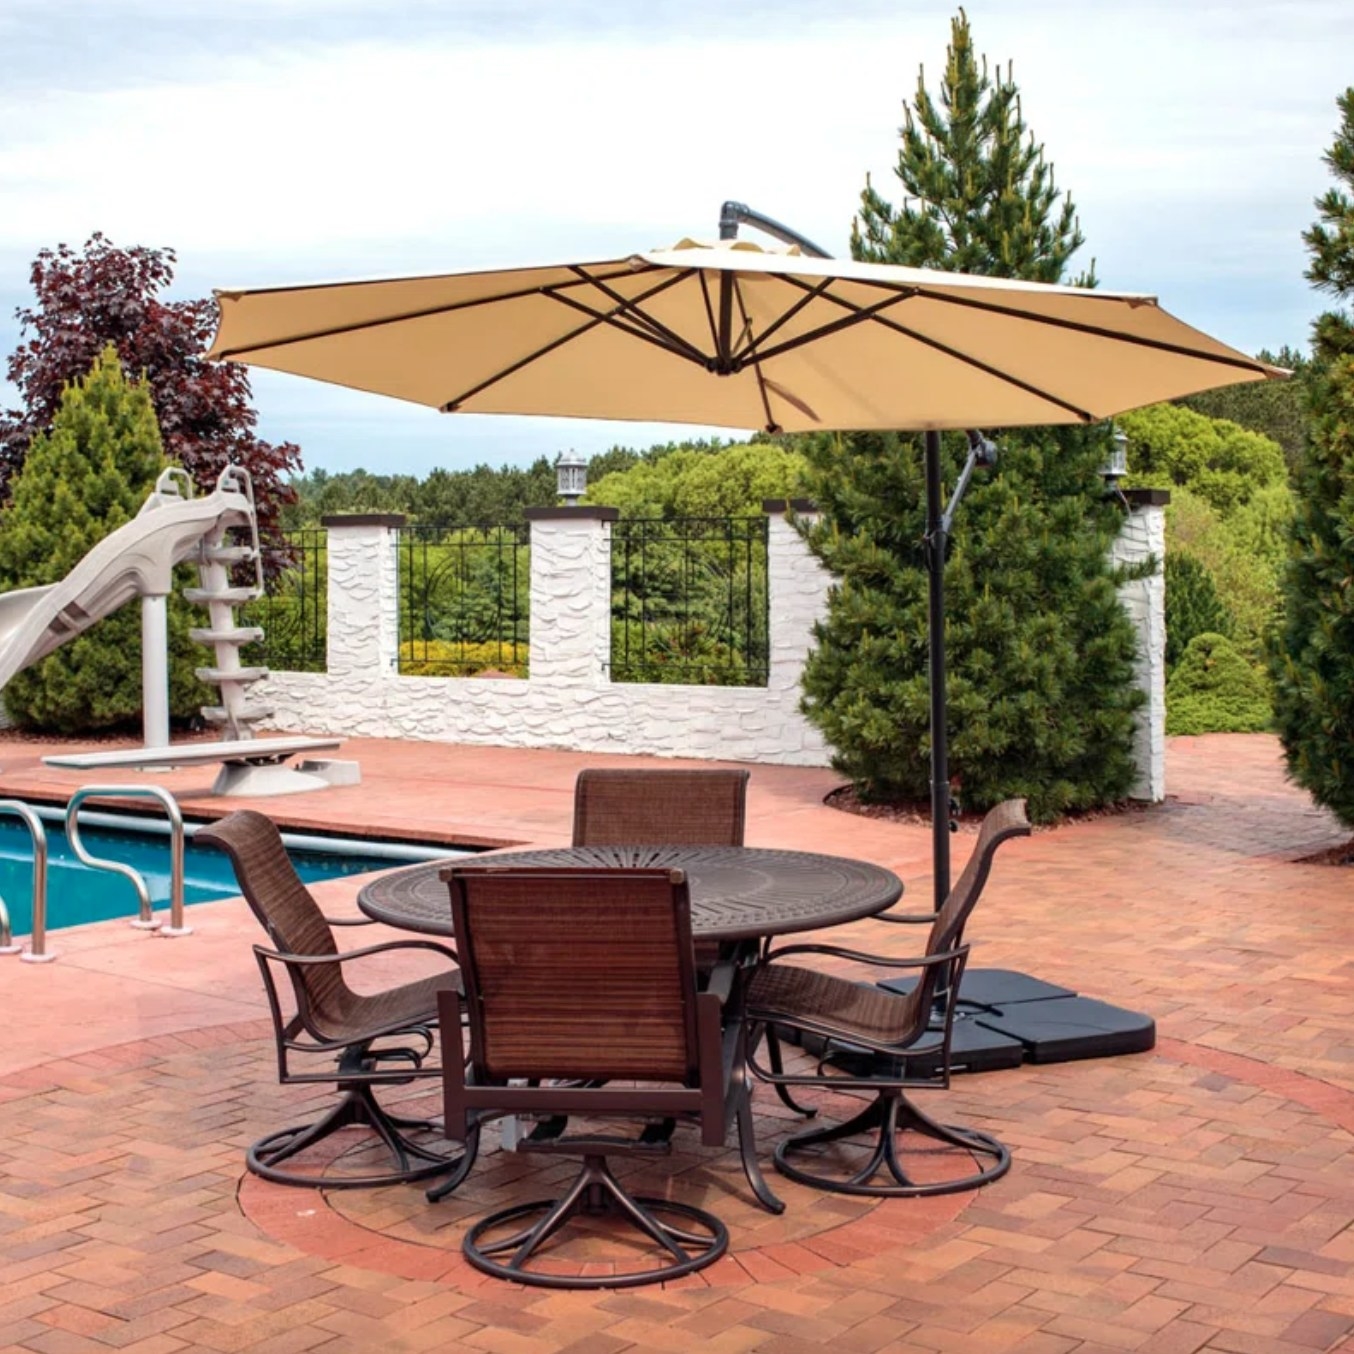 the tan umbrella casting shade over a brown outdoor table on a pool deck